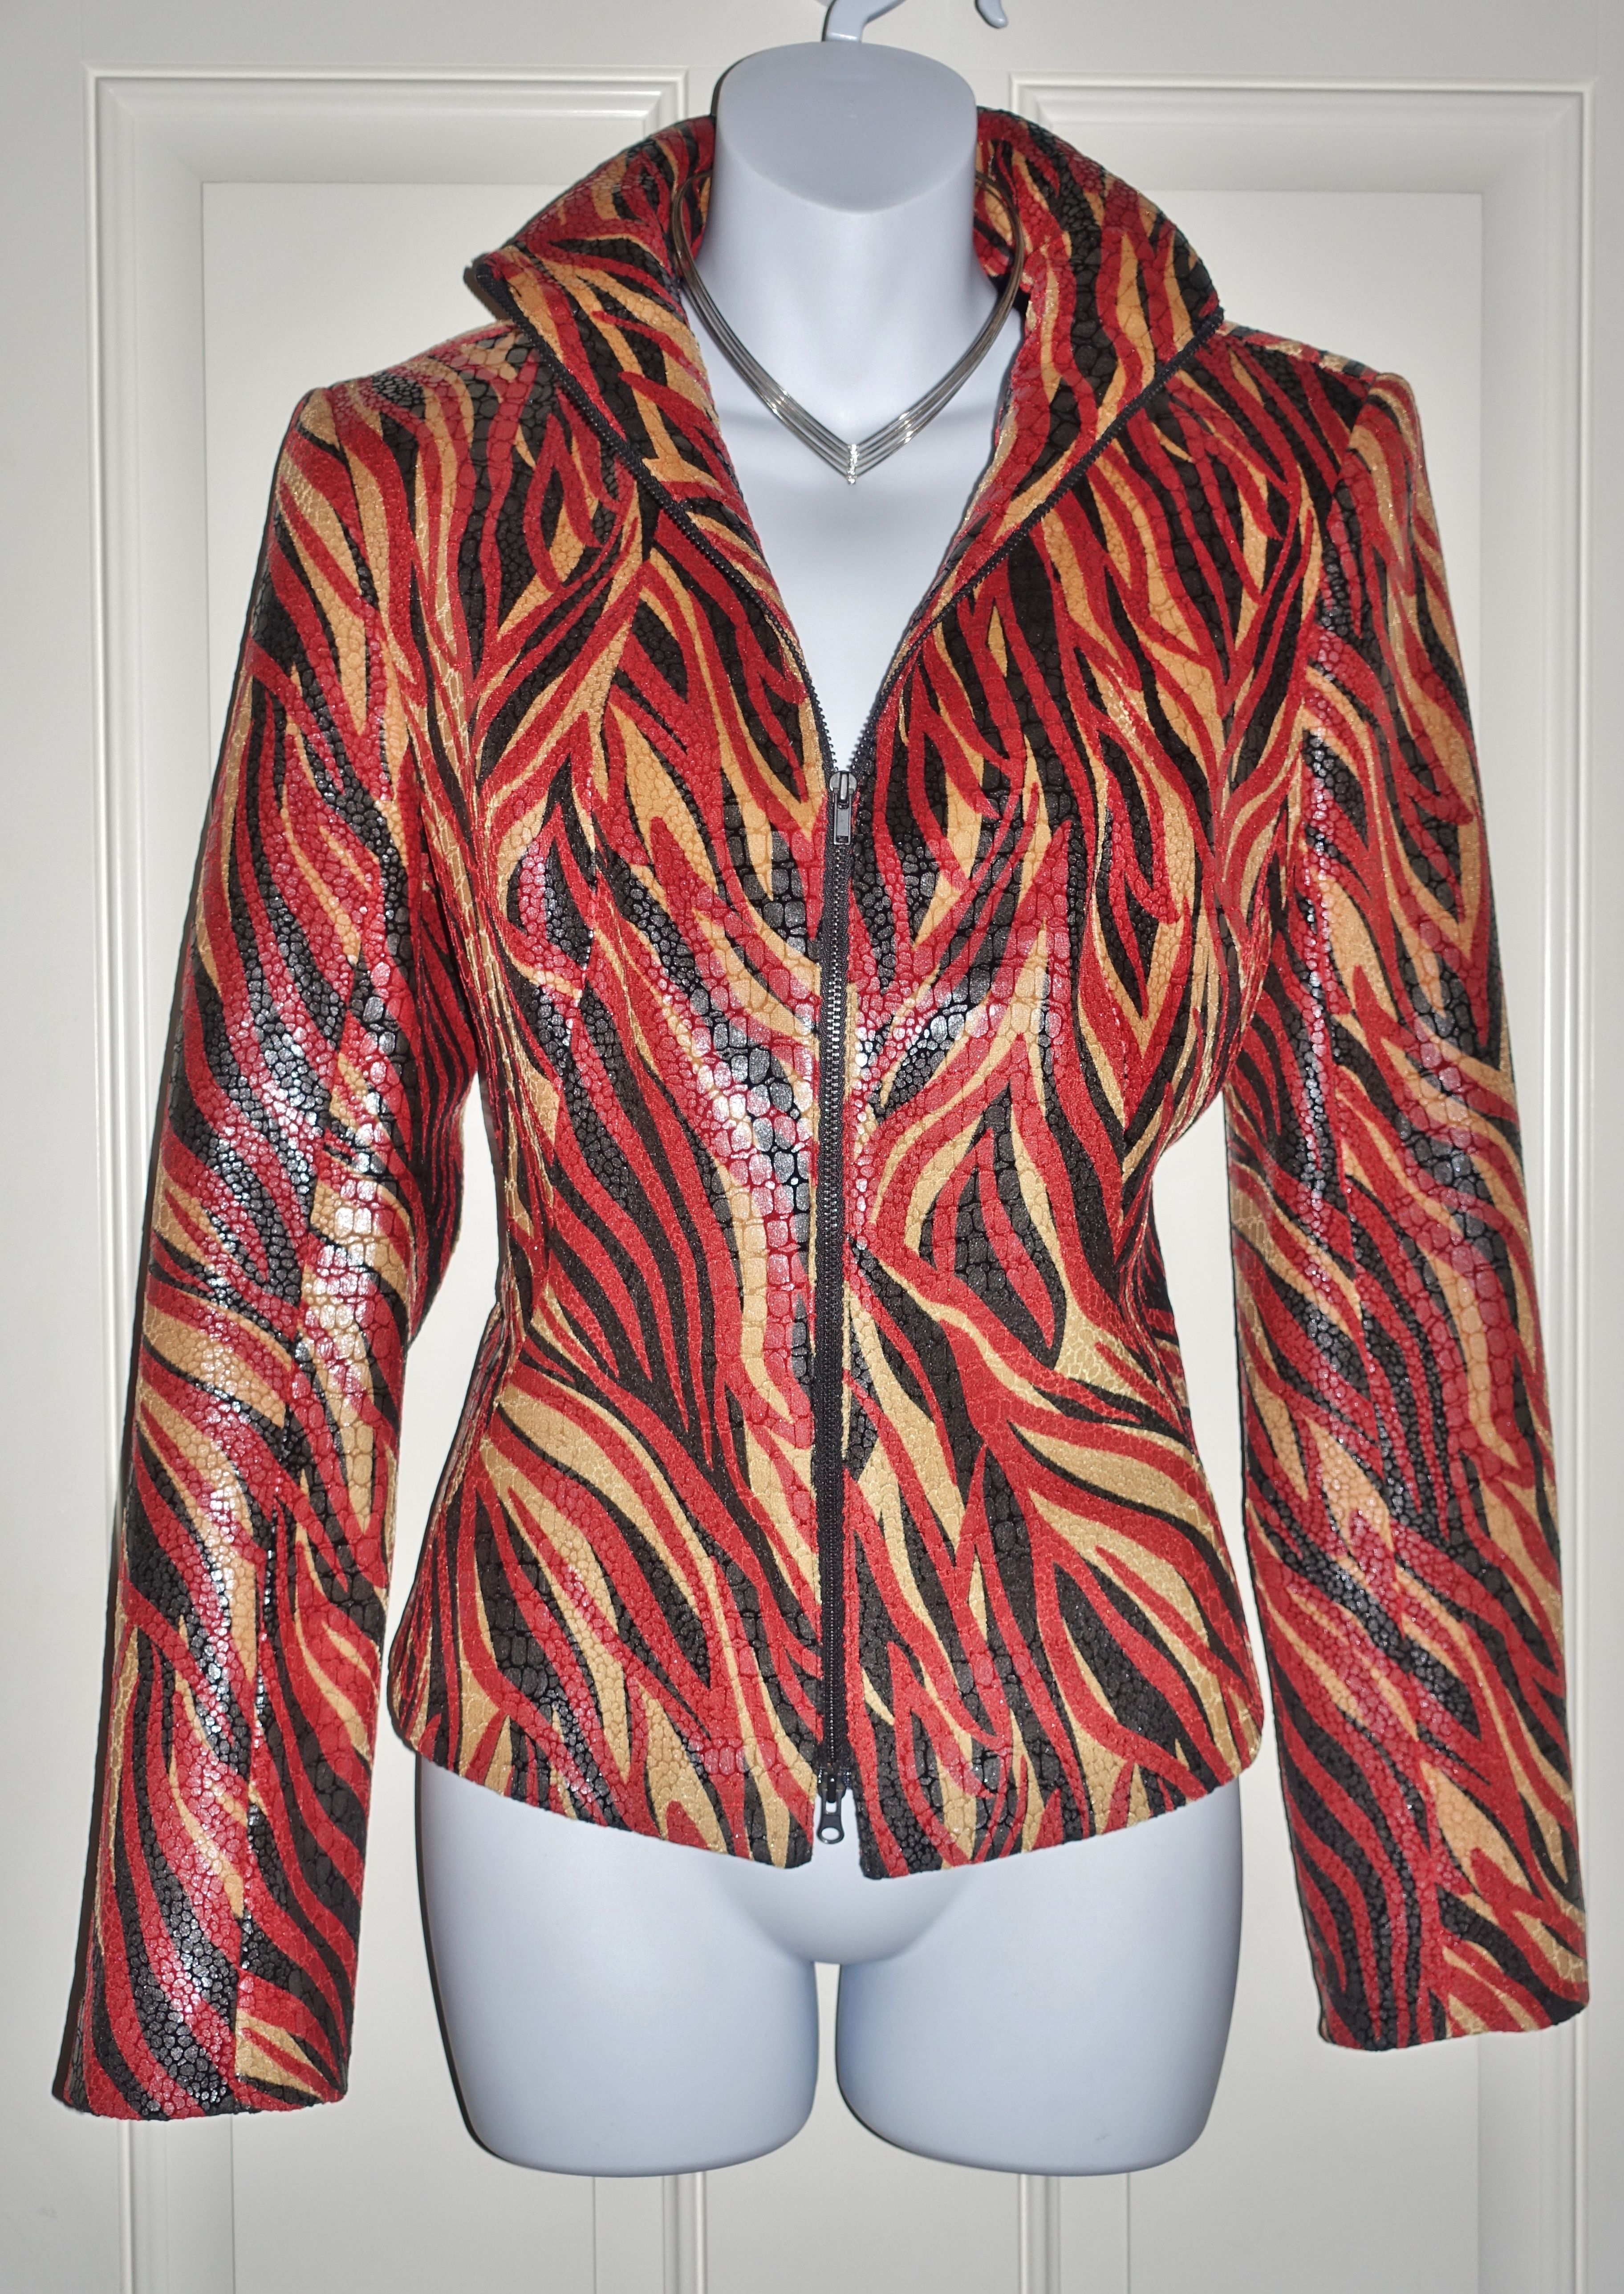 (FREE DELIVERY) "Cache" black/red/yellow fire flames snake-print motorcycle biker jacket (size S)